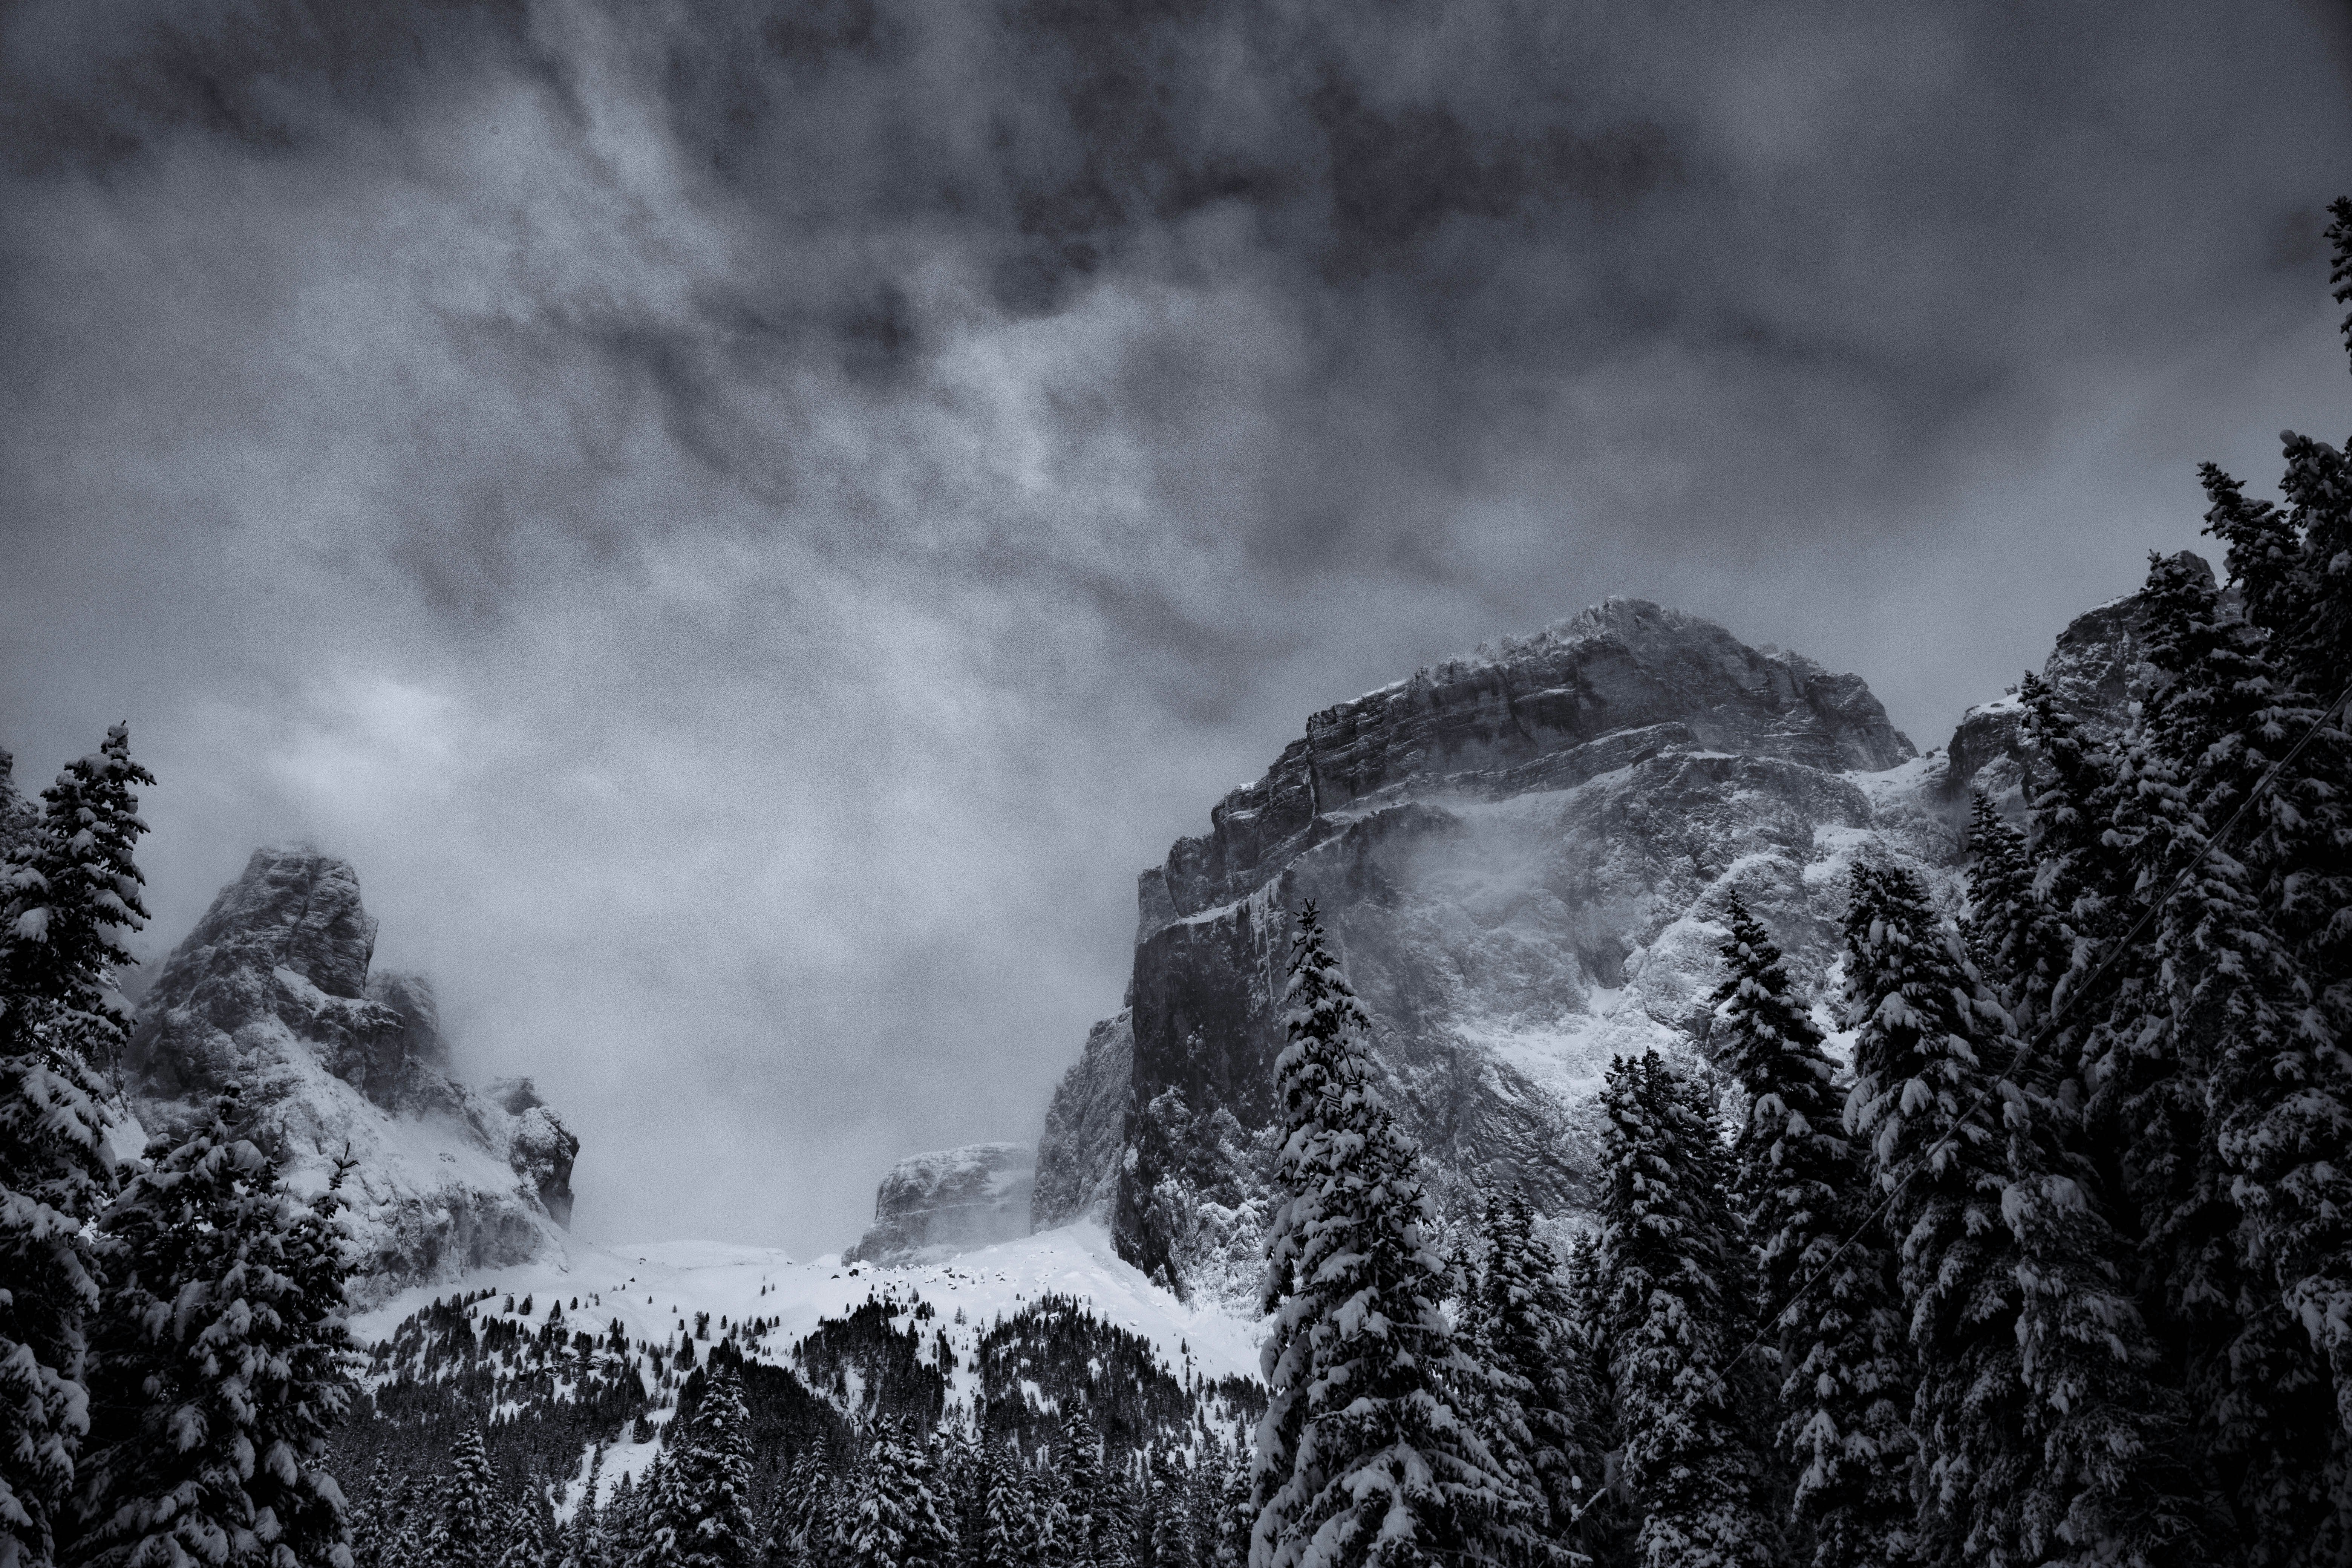 grayscale photography of summit view of mountain covered with snow